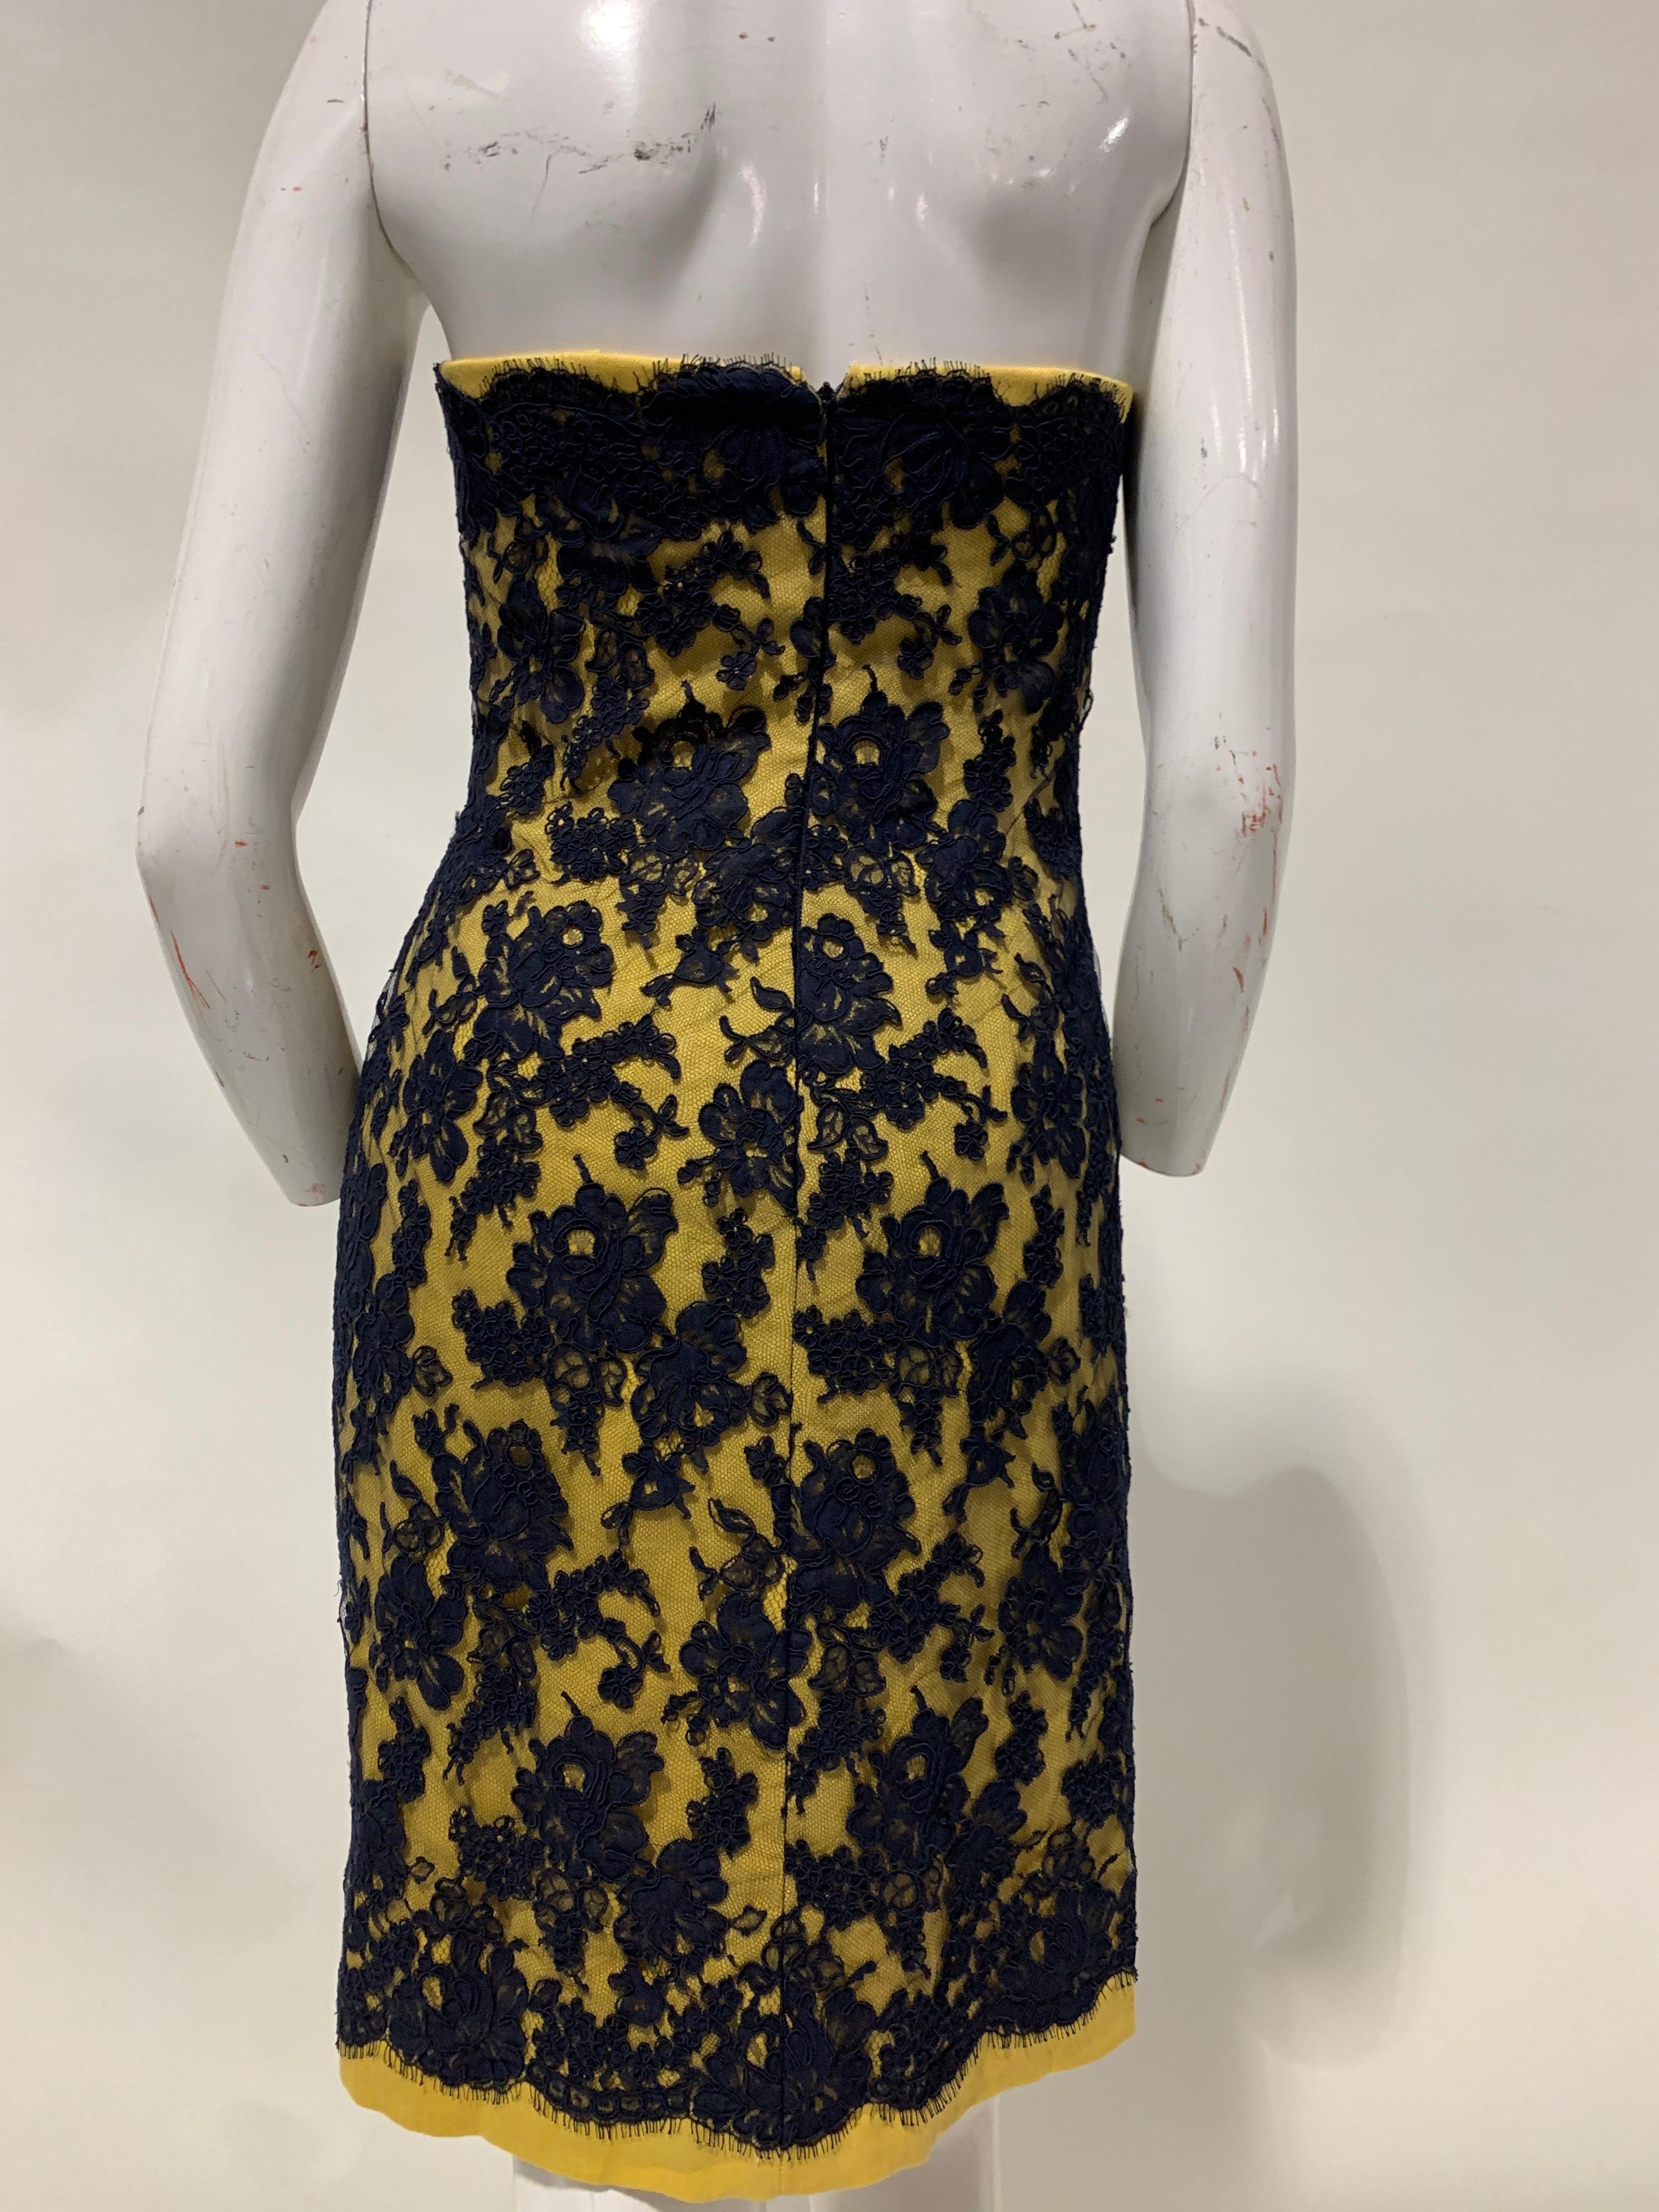 1990 Bill Blass Butter Yellow Cotton Twill & Navy Blue French Lace Mini Dress In Excellent Condition For Sale In Gresham, OR